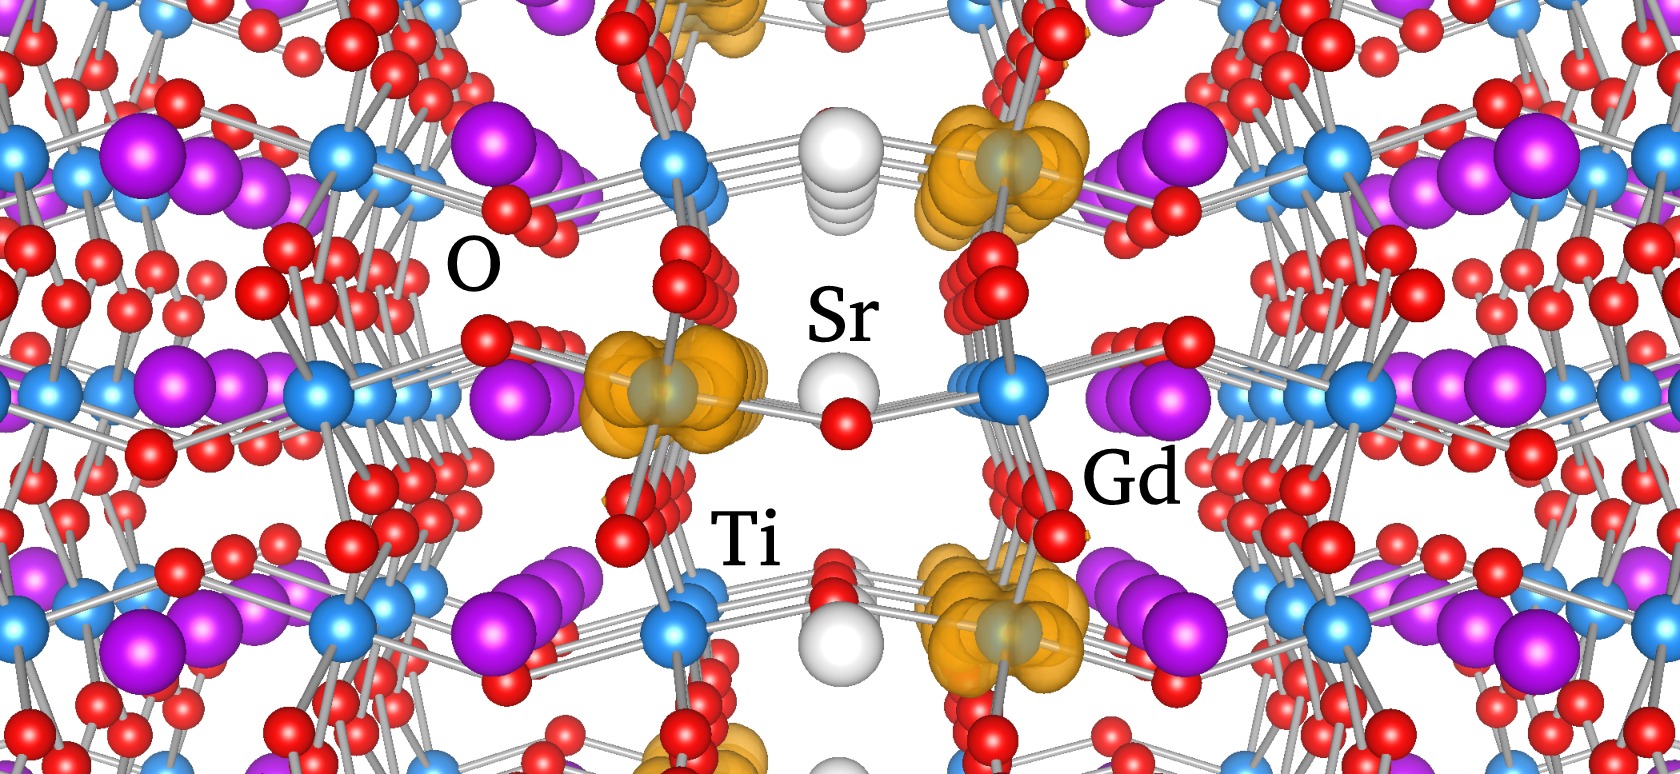 Fig. 3 Here, a single layer of SrTiO3 is surrounded by GdTiO3. The interfaces between the two materials create an electron density of ½ electron per Ti, and the electrons localize just as they do in the bulk SrTiO3 shown above.  (Lars Bjaalie)
